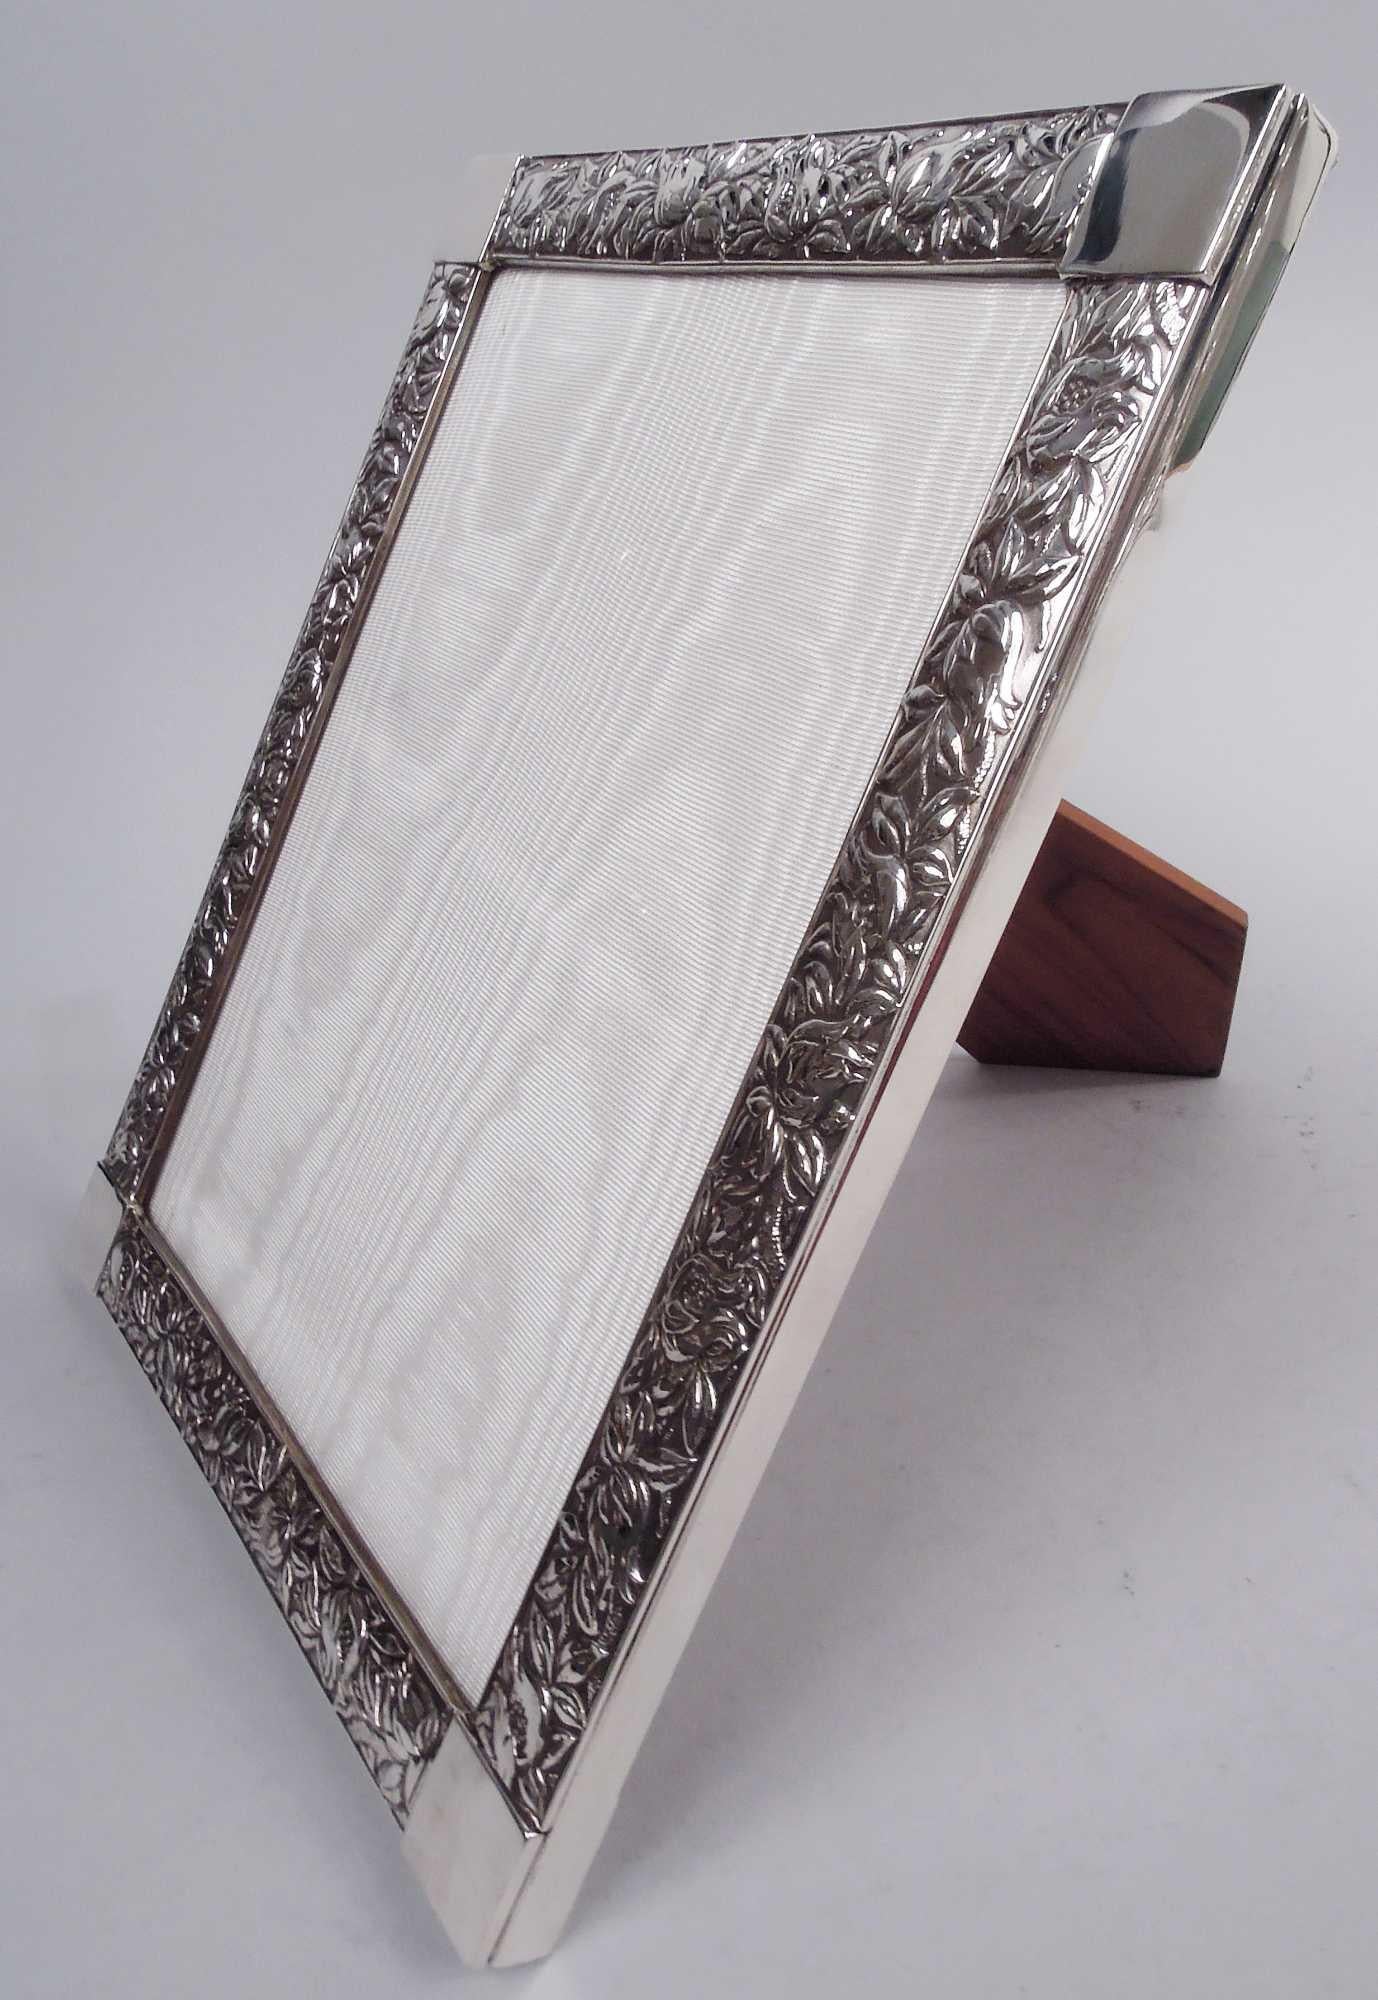 Art Nouveau sterling silver picture frame. Made by Tiffany & Co. in New York. Rectangular window in cast surround with overlapping leaves and pomegranates. Applied plain corner squares (vacant). With glass, silk lining, and wood laminate back and